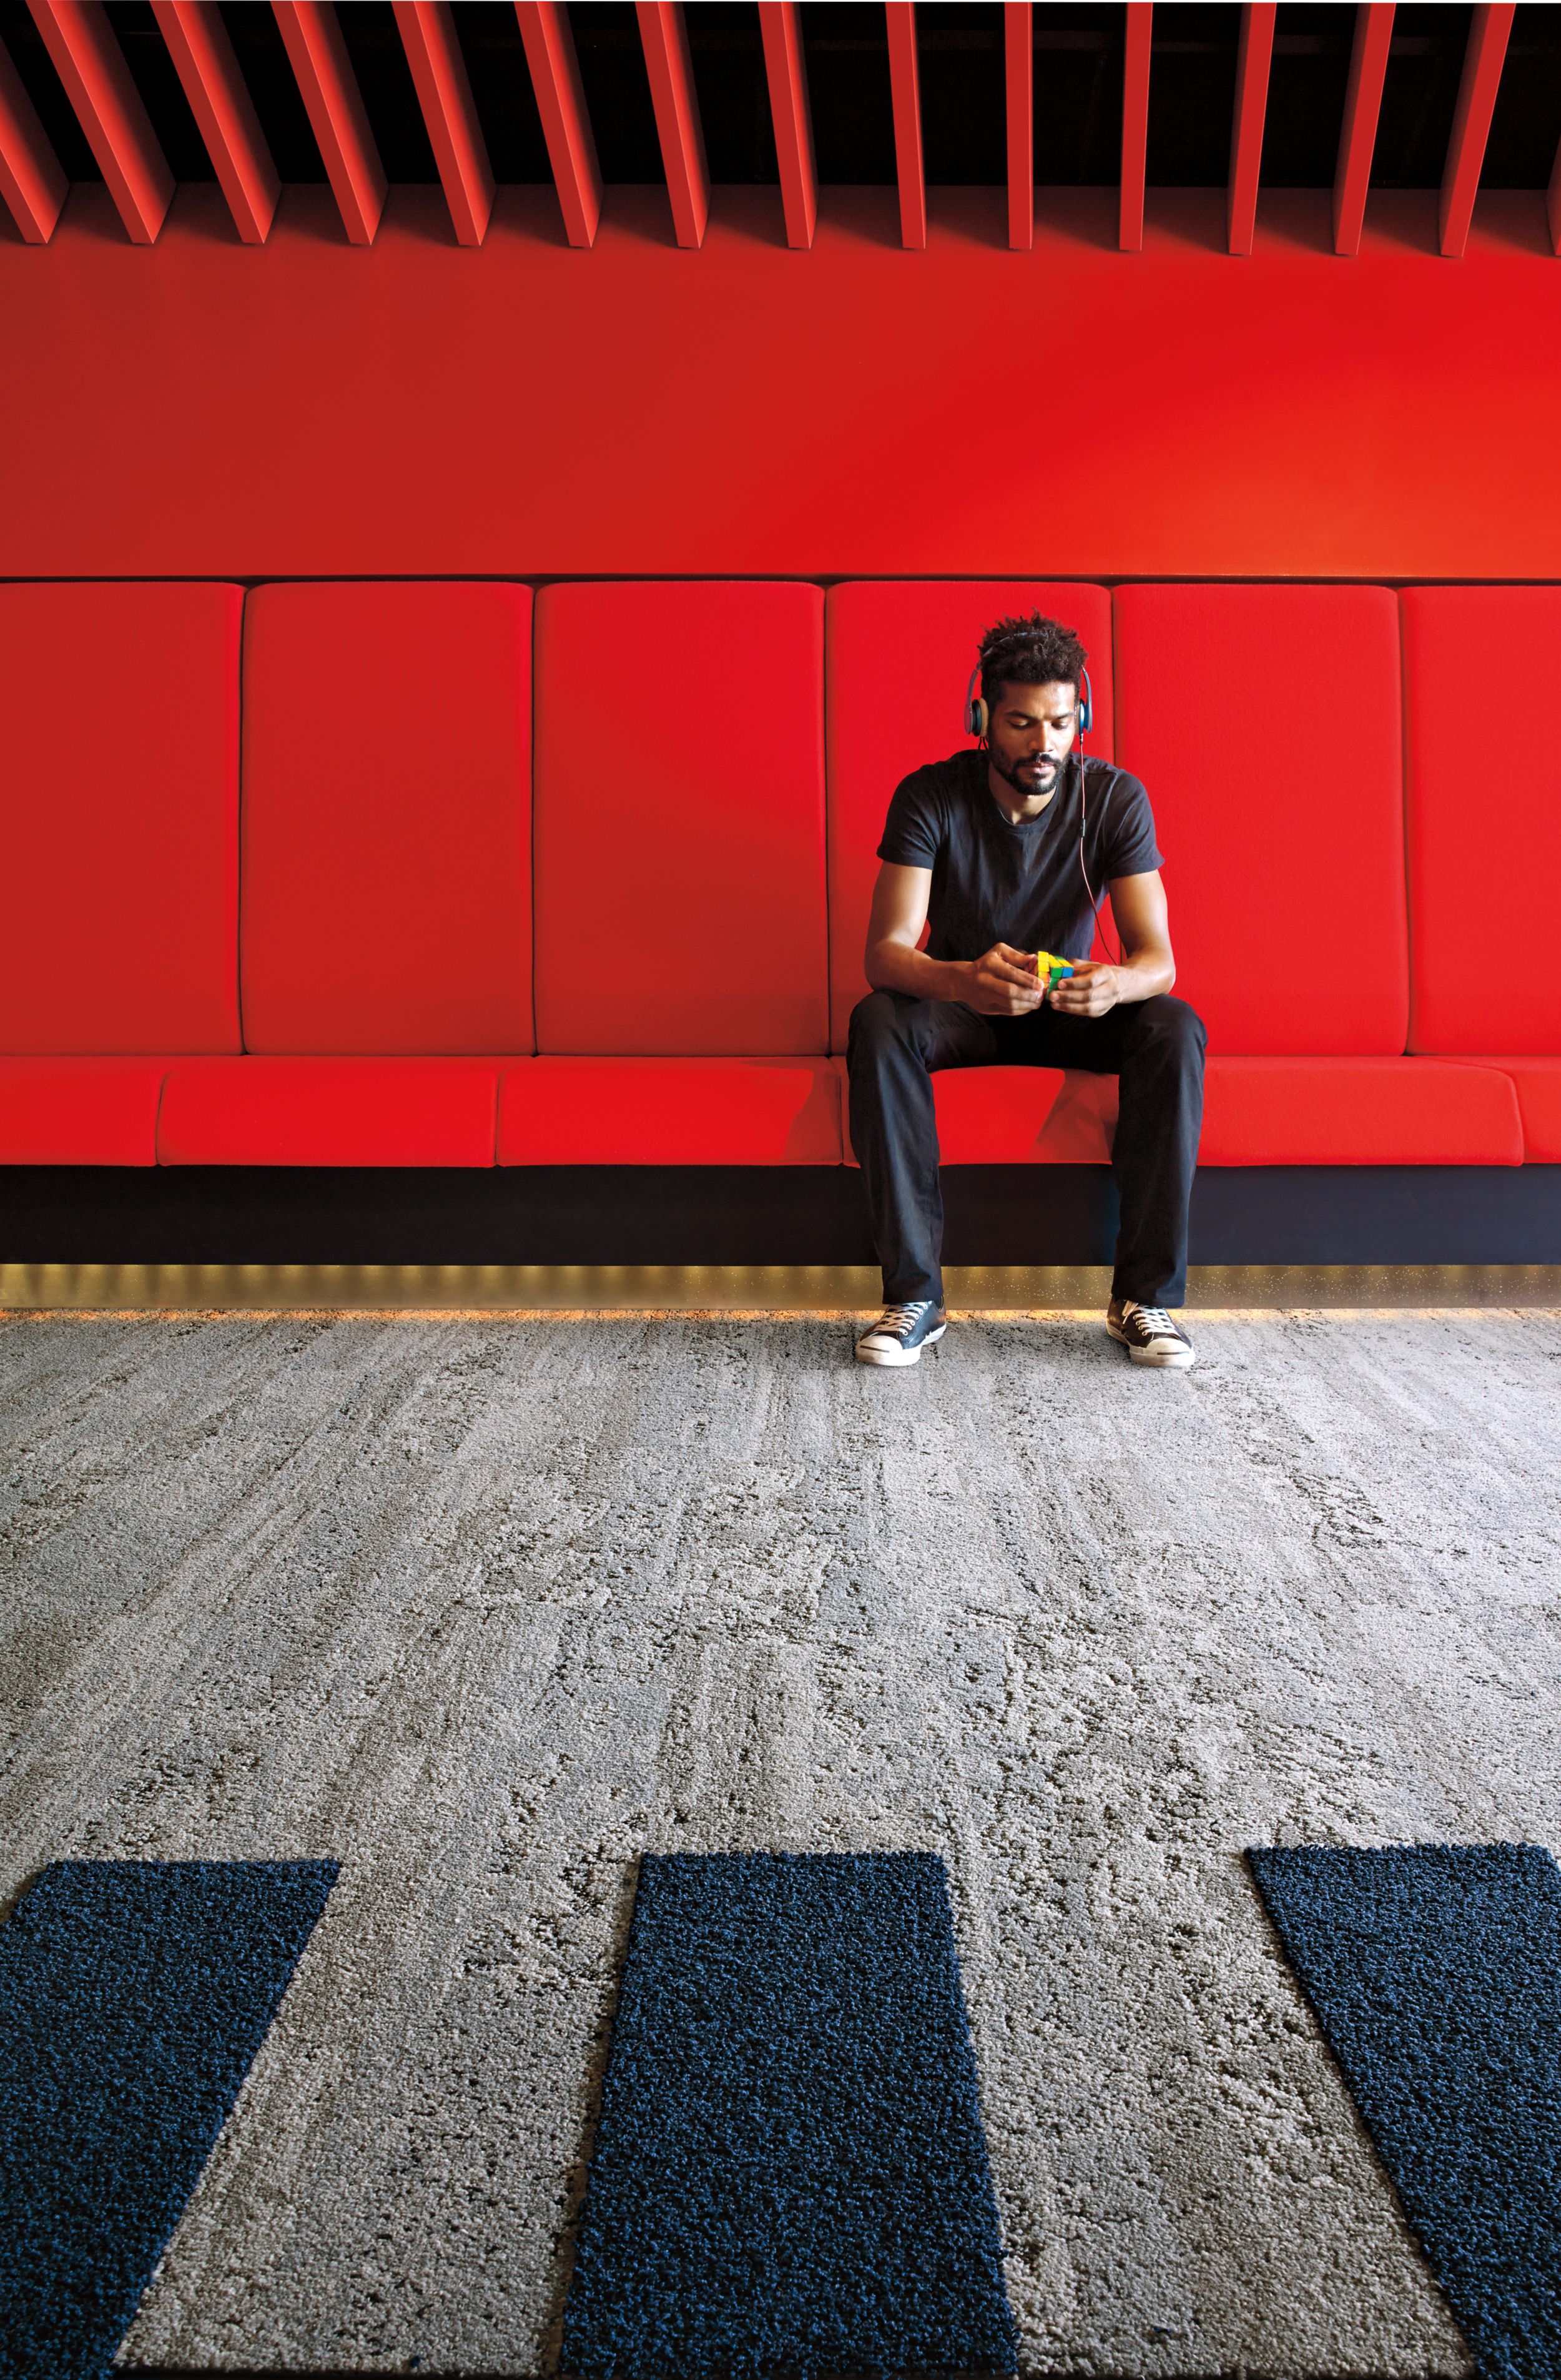 Interface HN810 plank carpet tile in waiting area with red bench and wall and man listening to music numéro d’image 3